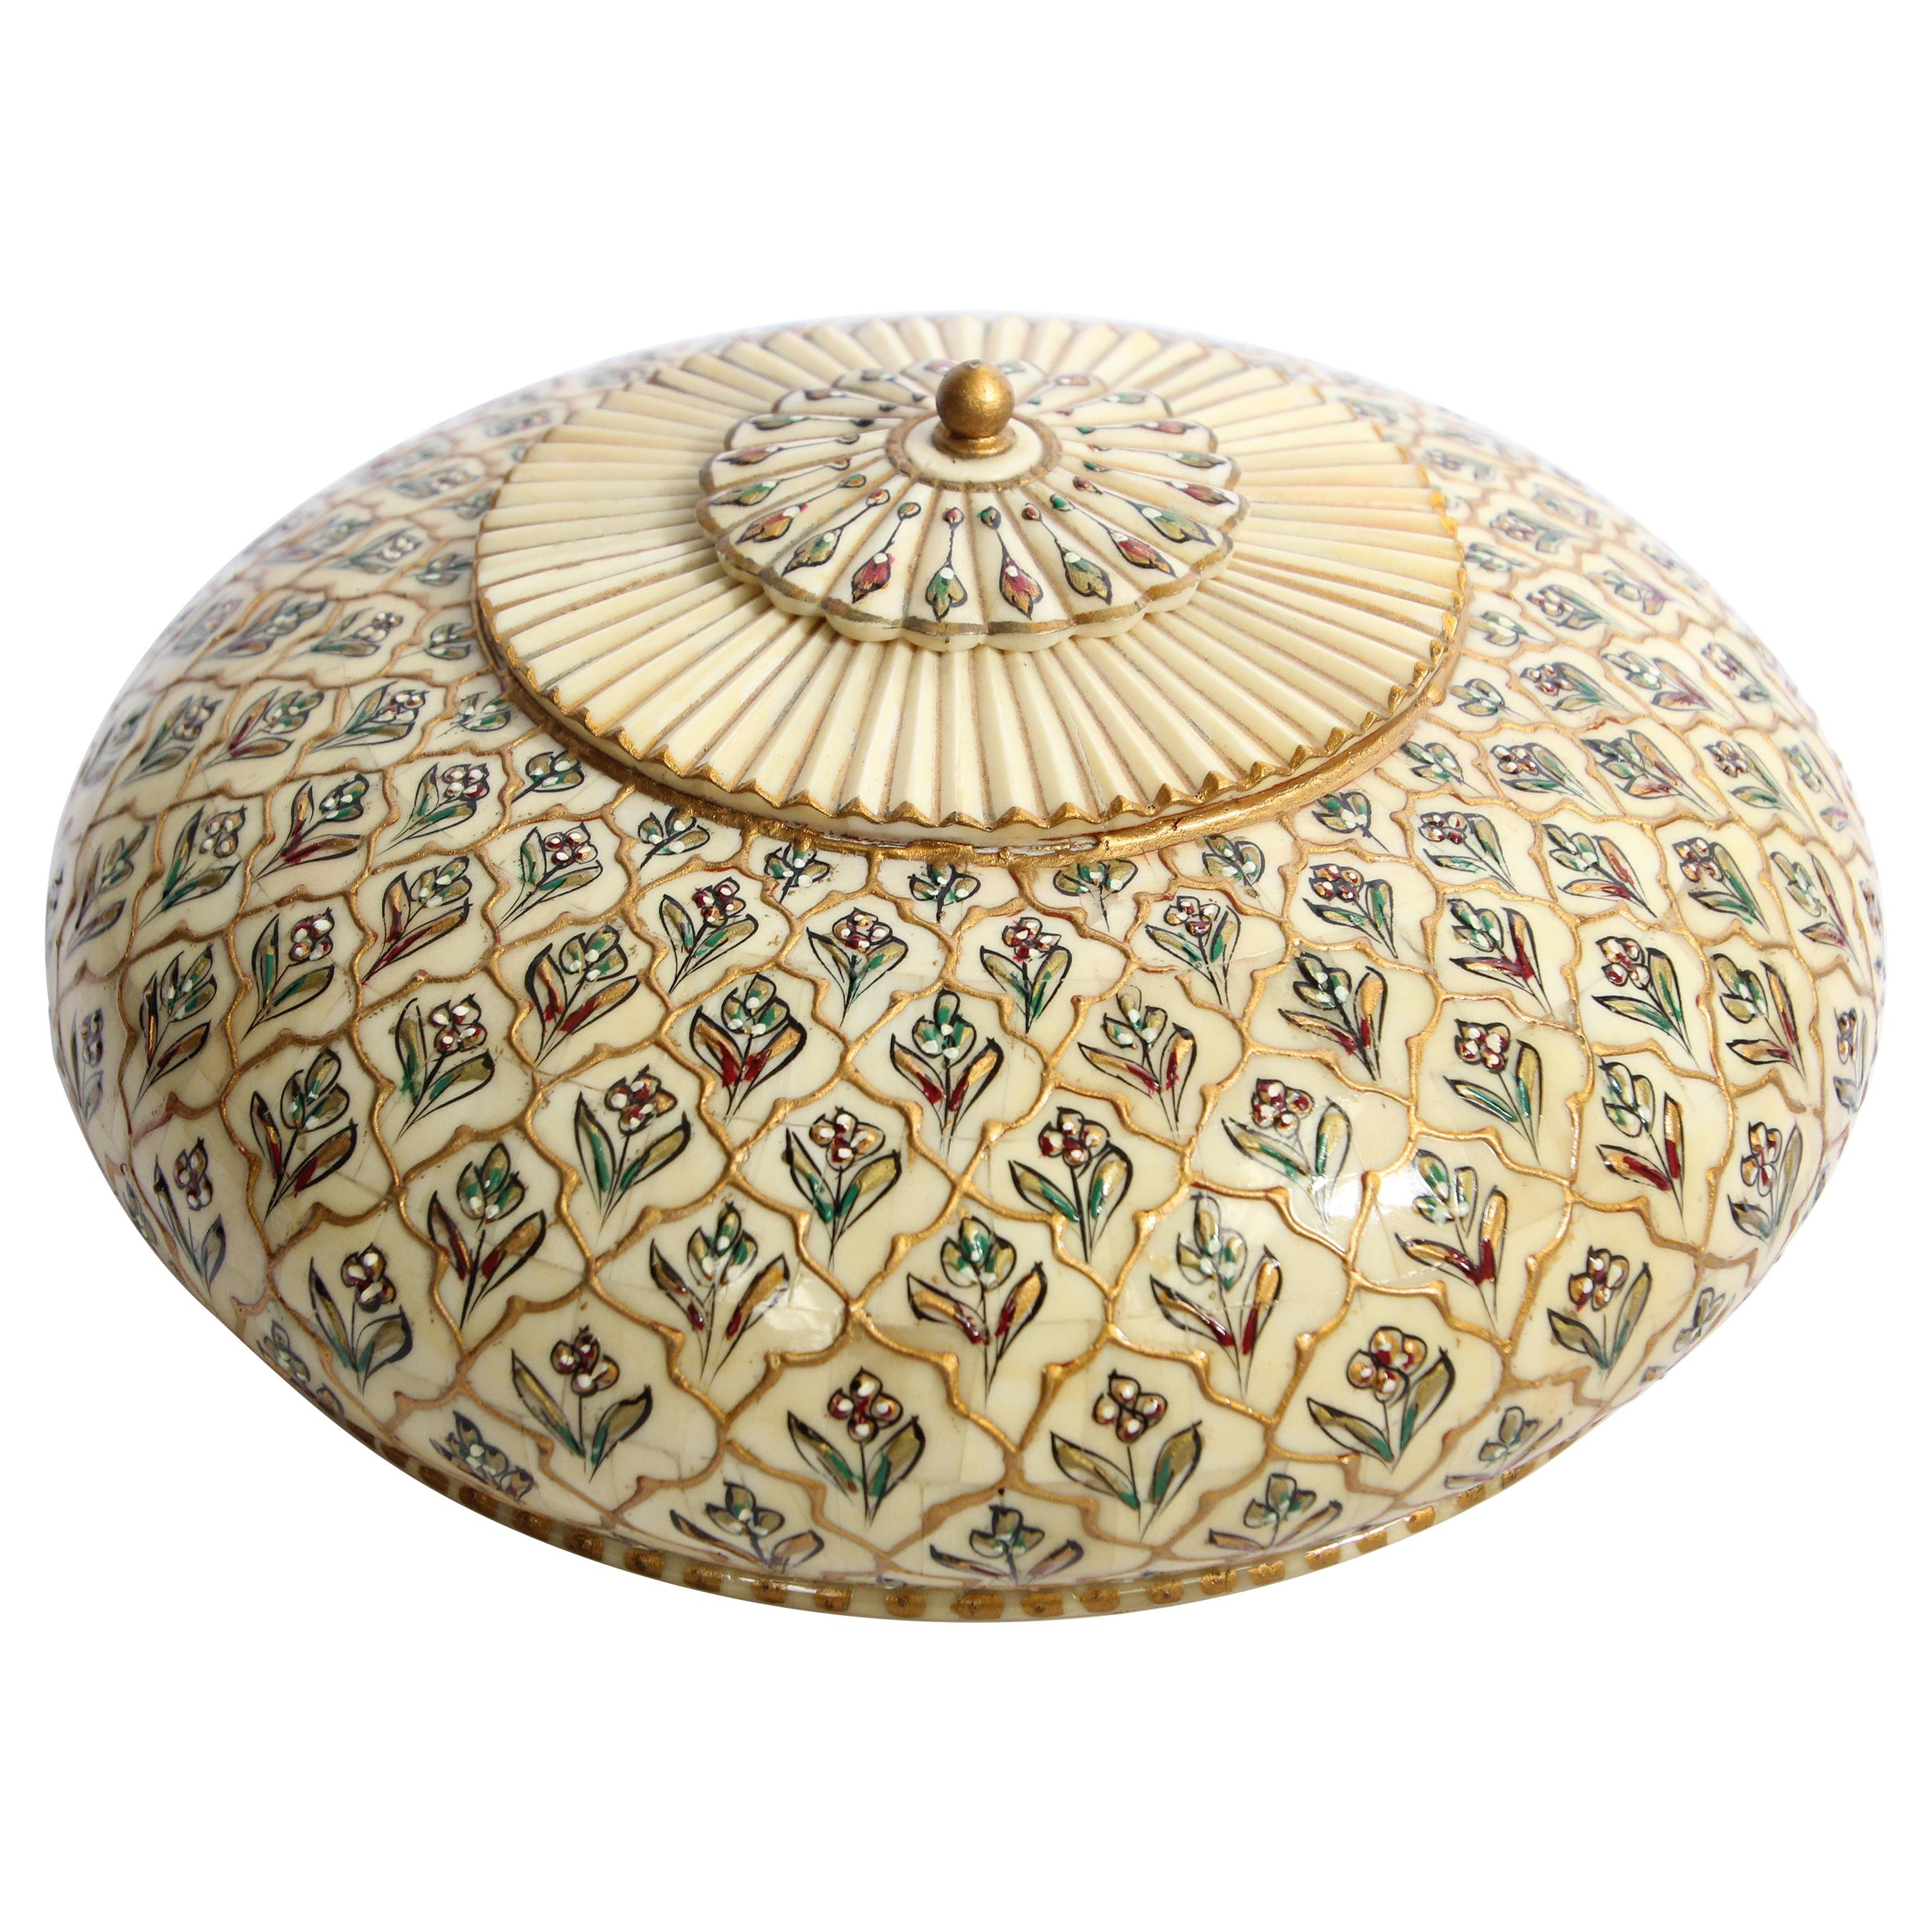 Collectible Opium Container Mughal Art Round Lidded Box For Sale